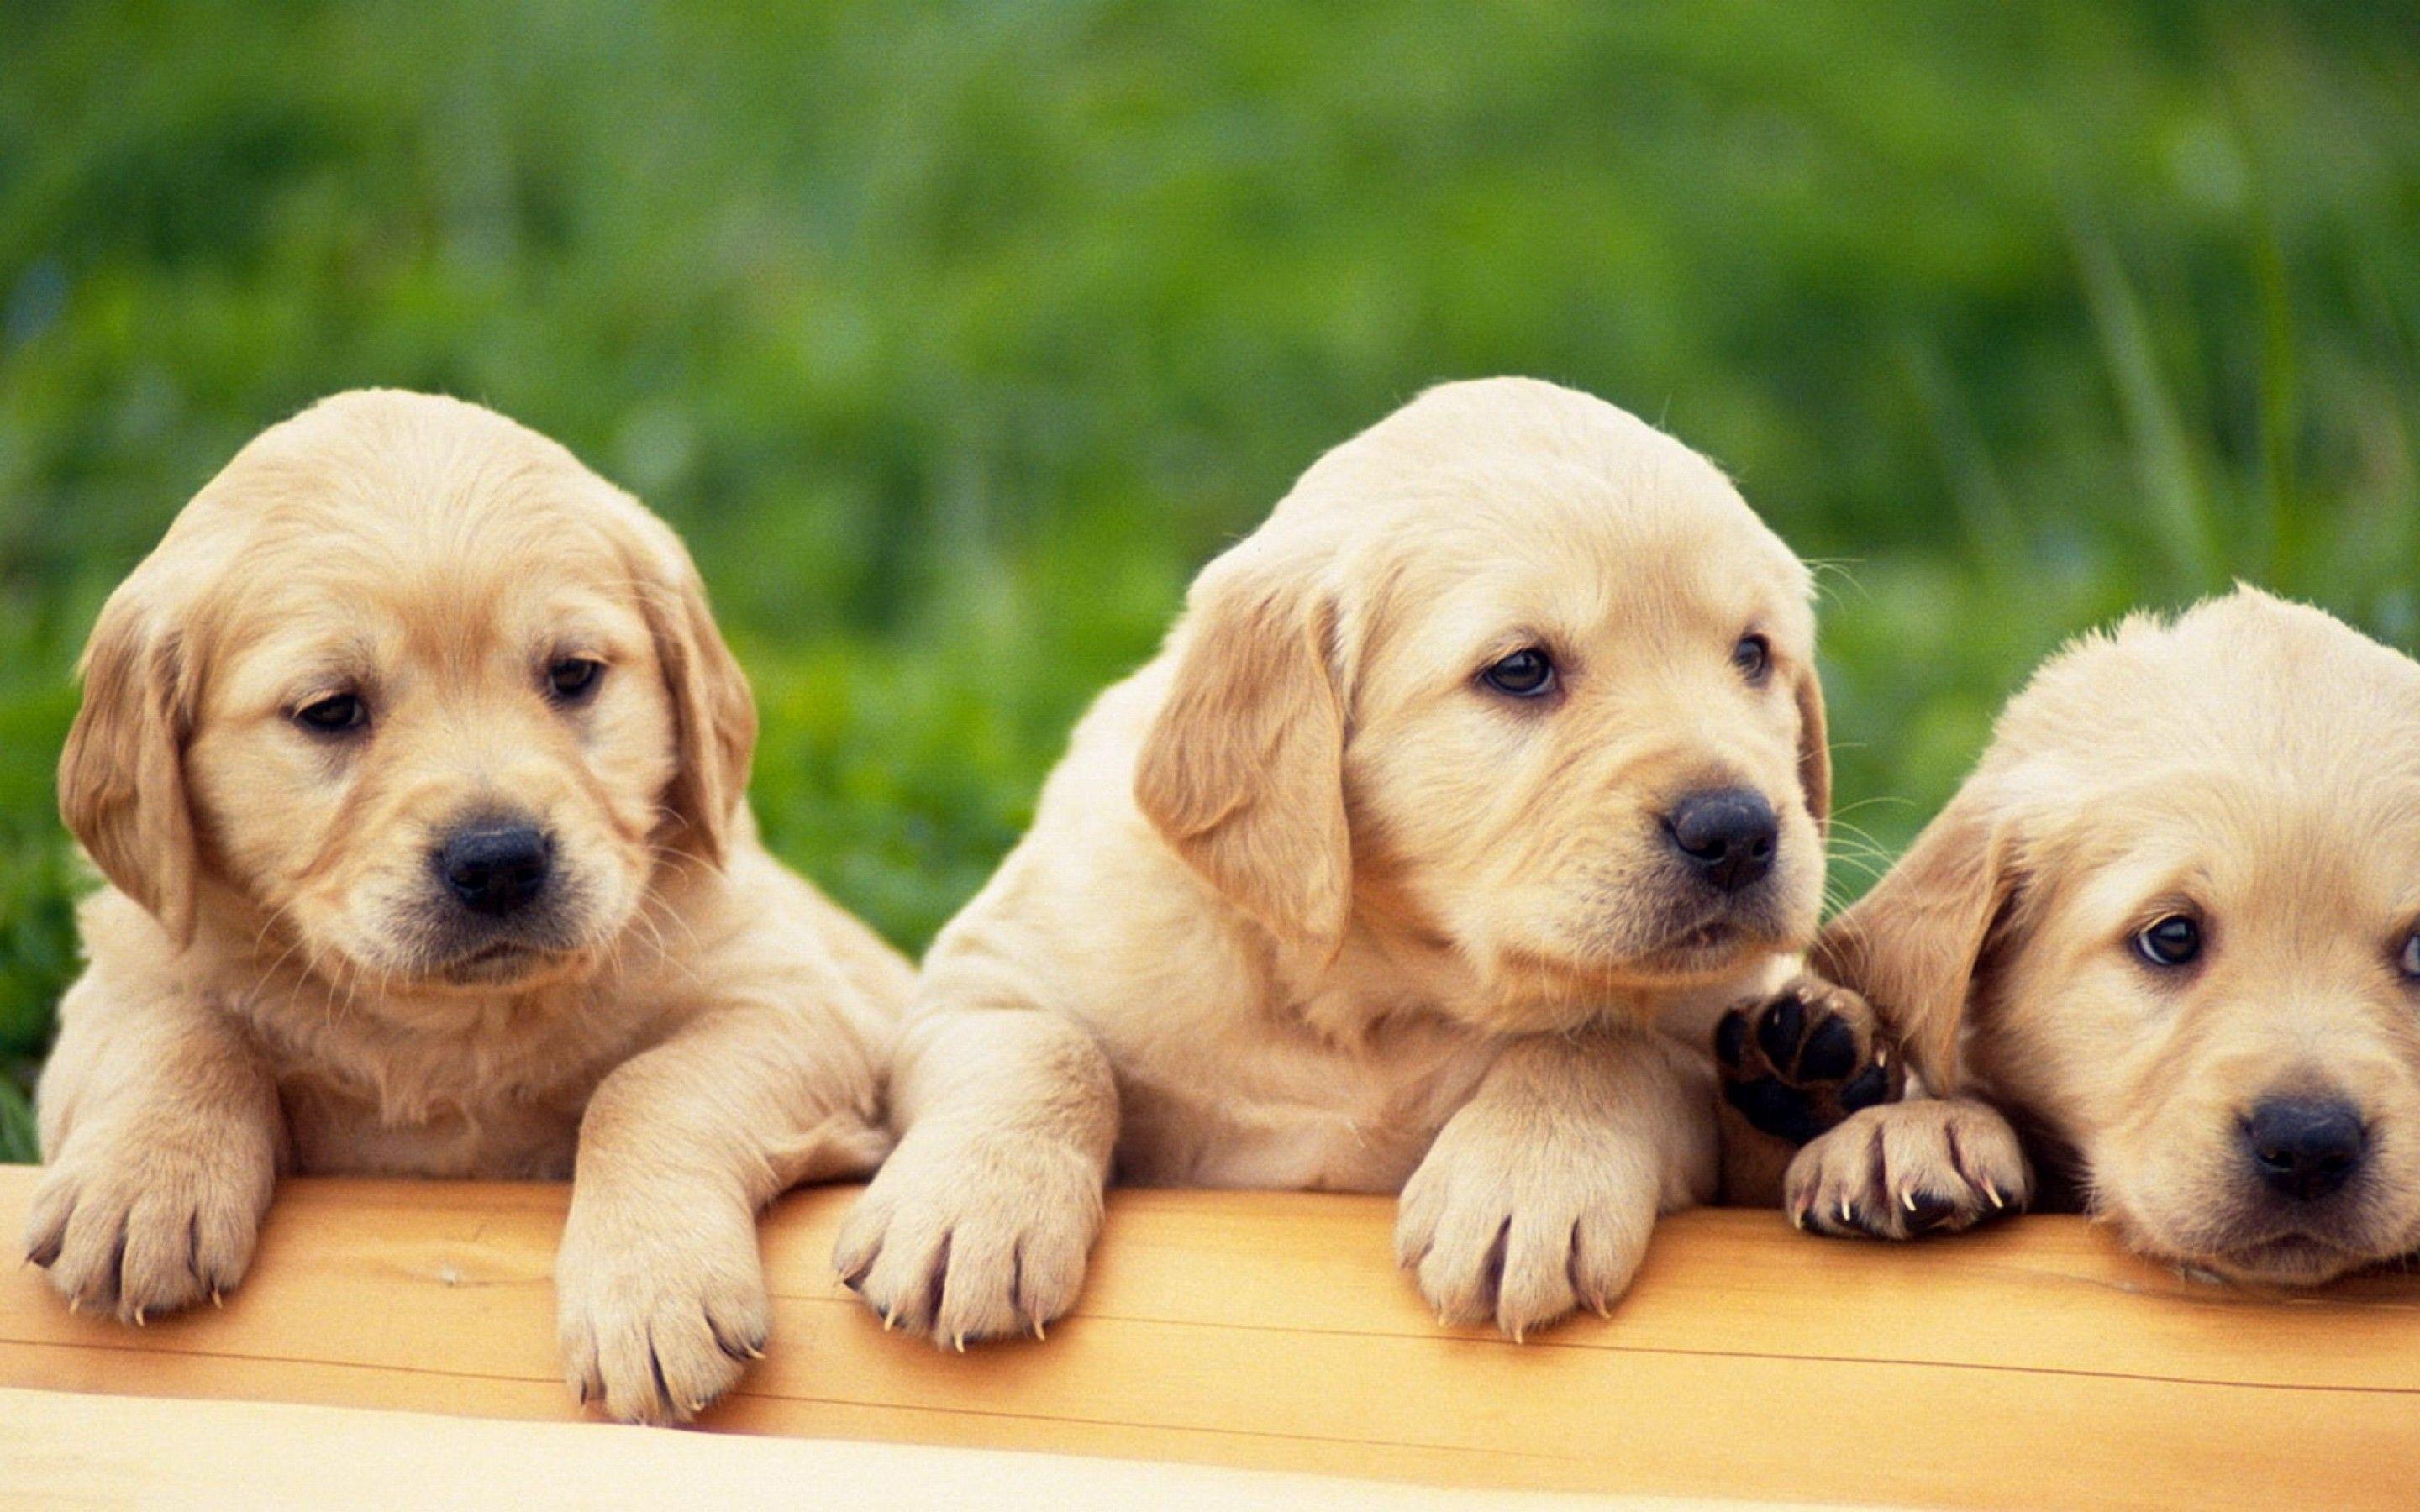 51 Wallpapers of Cute Puppies